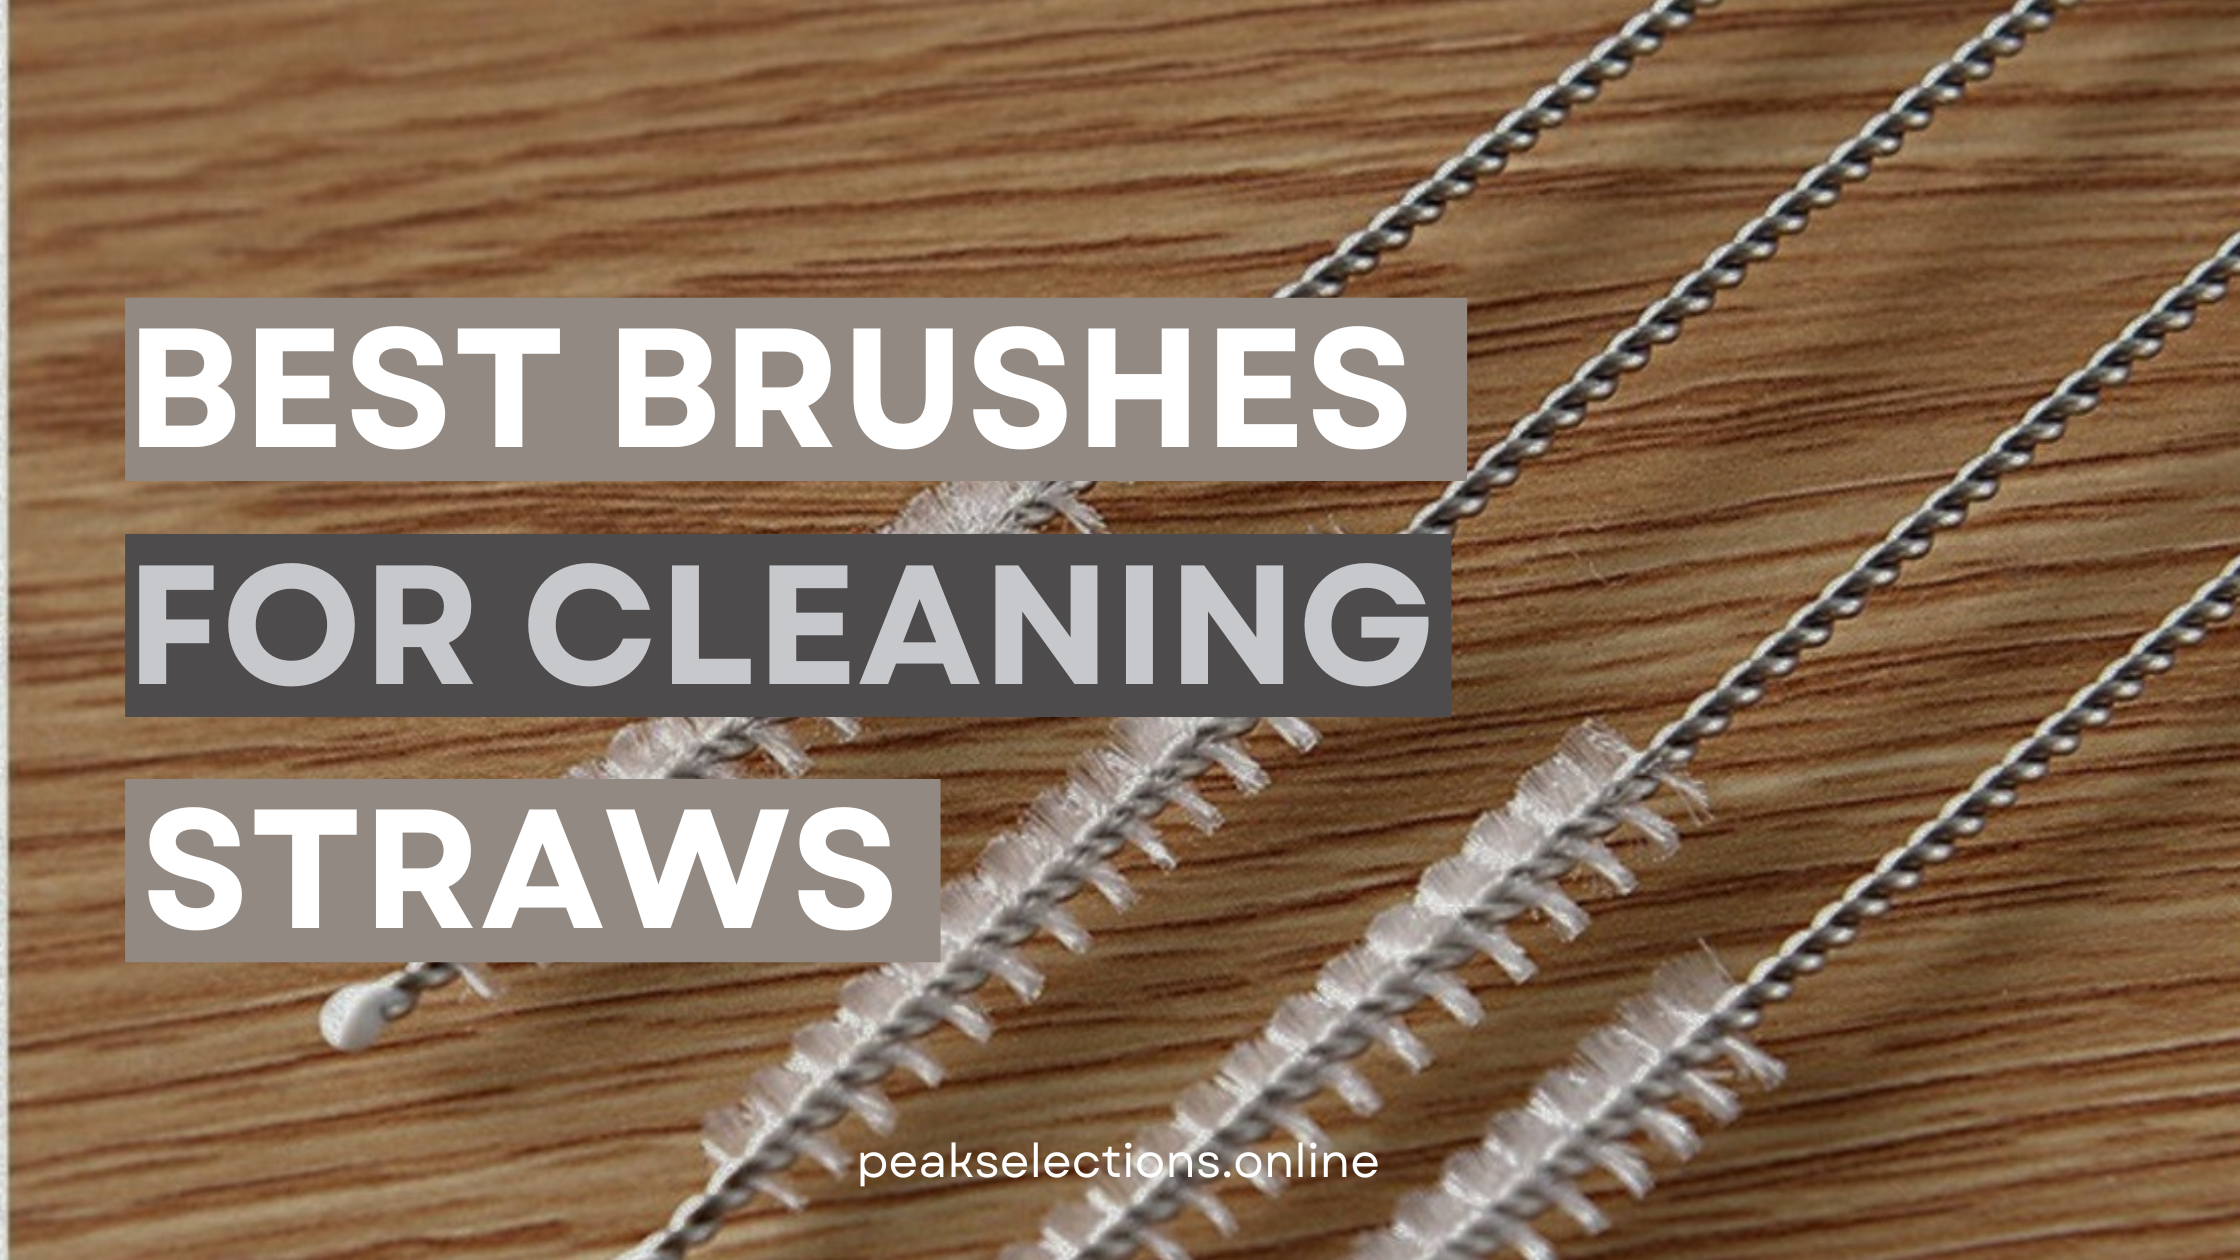 brushes for cleaning straws